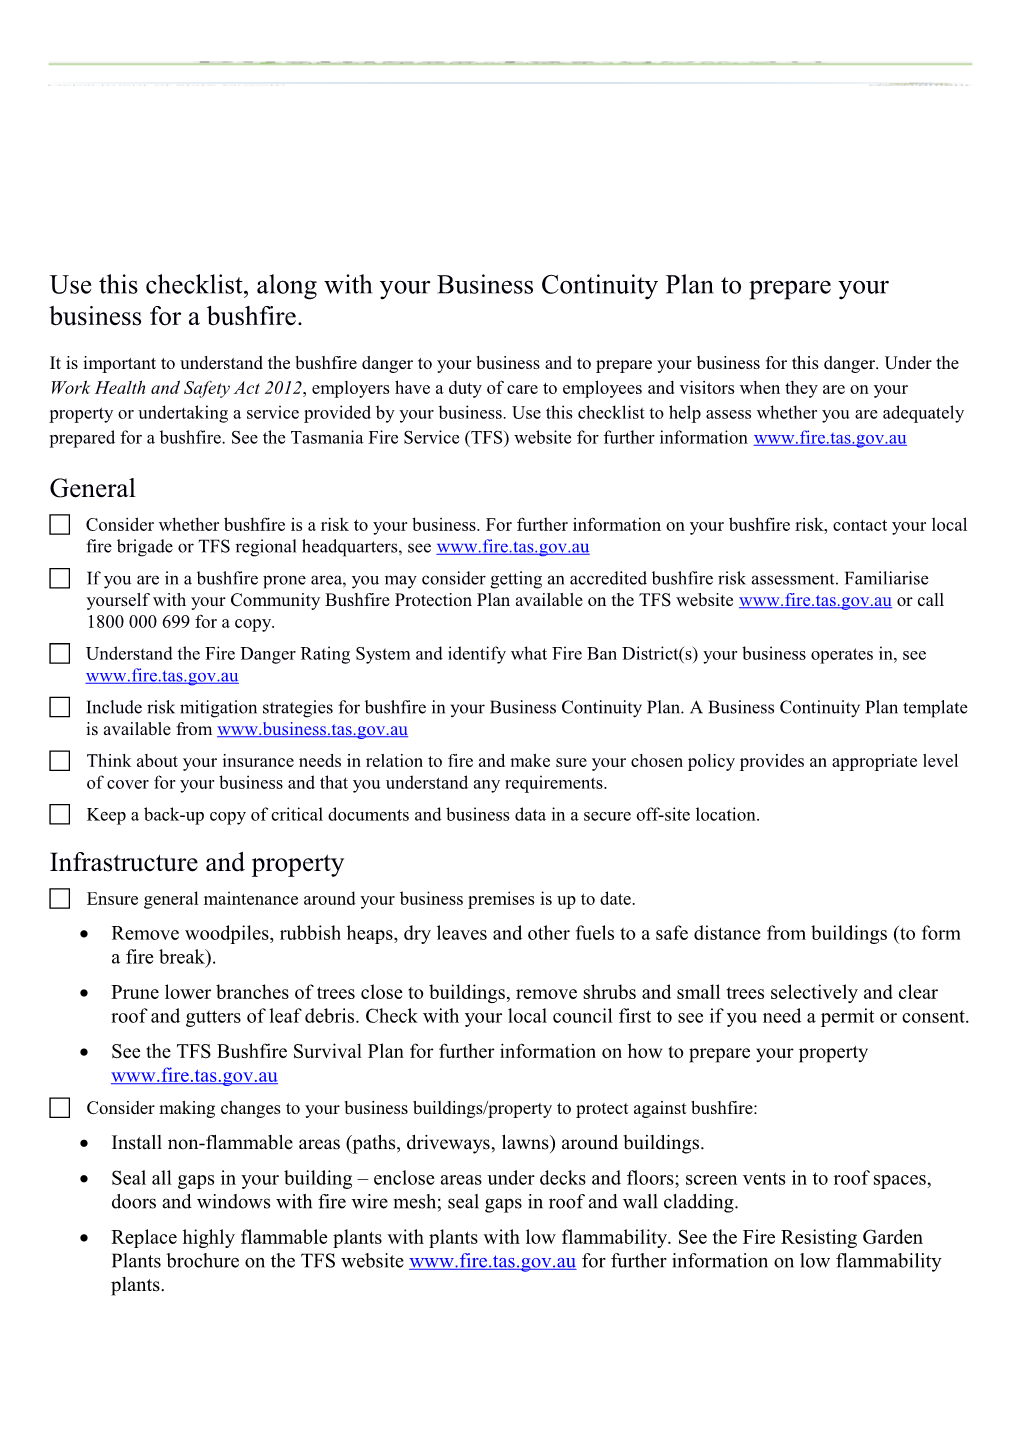 Use This Checklist, Along with Your Business Continuity Plan to Prepare Your Business